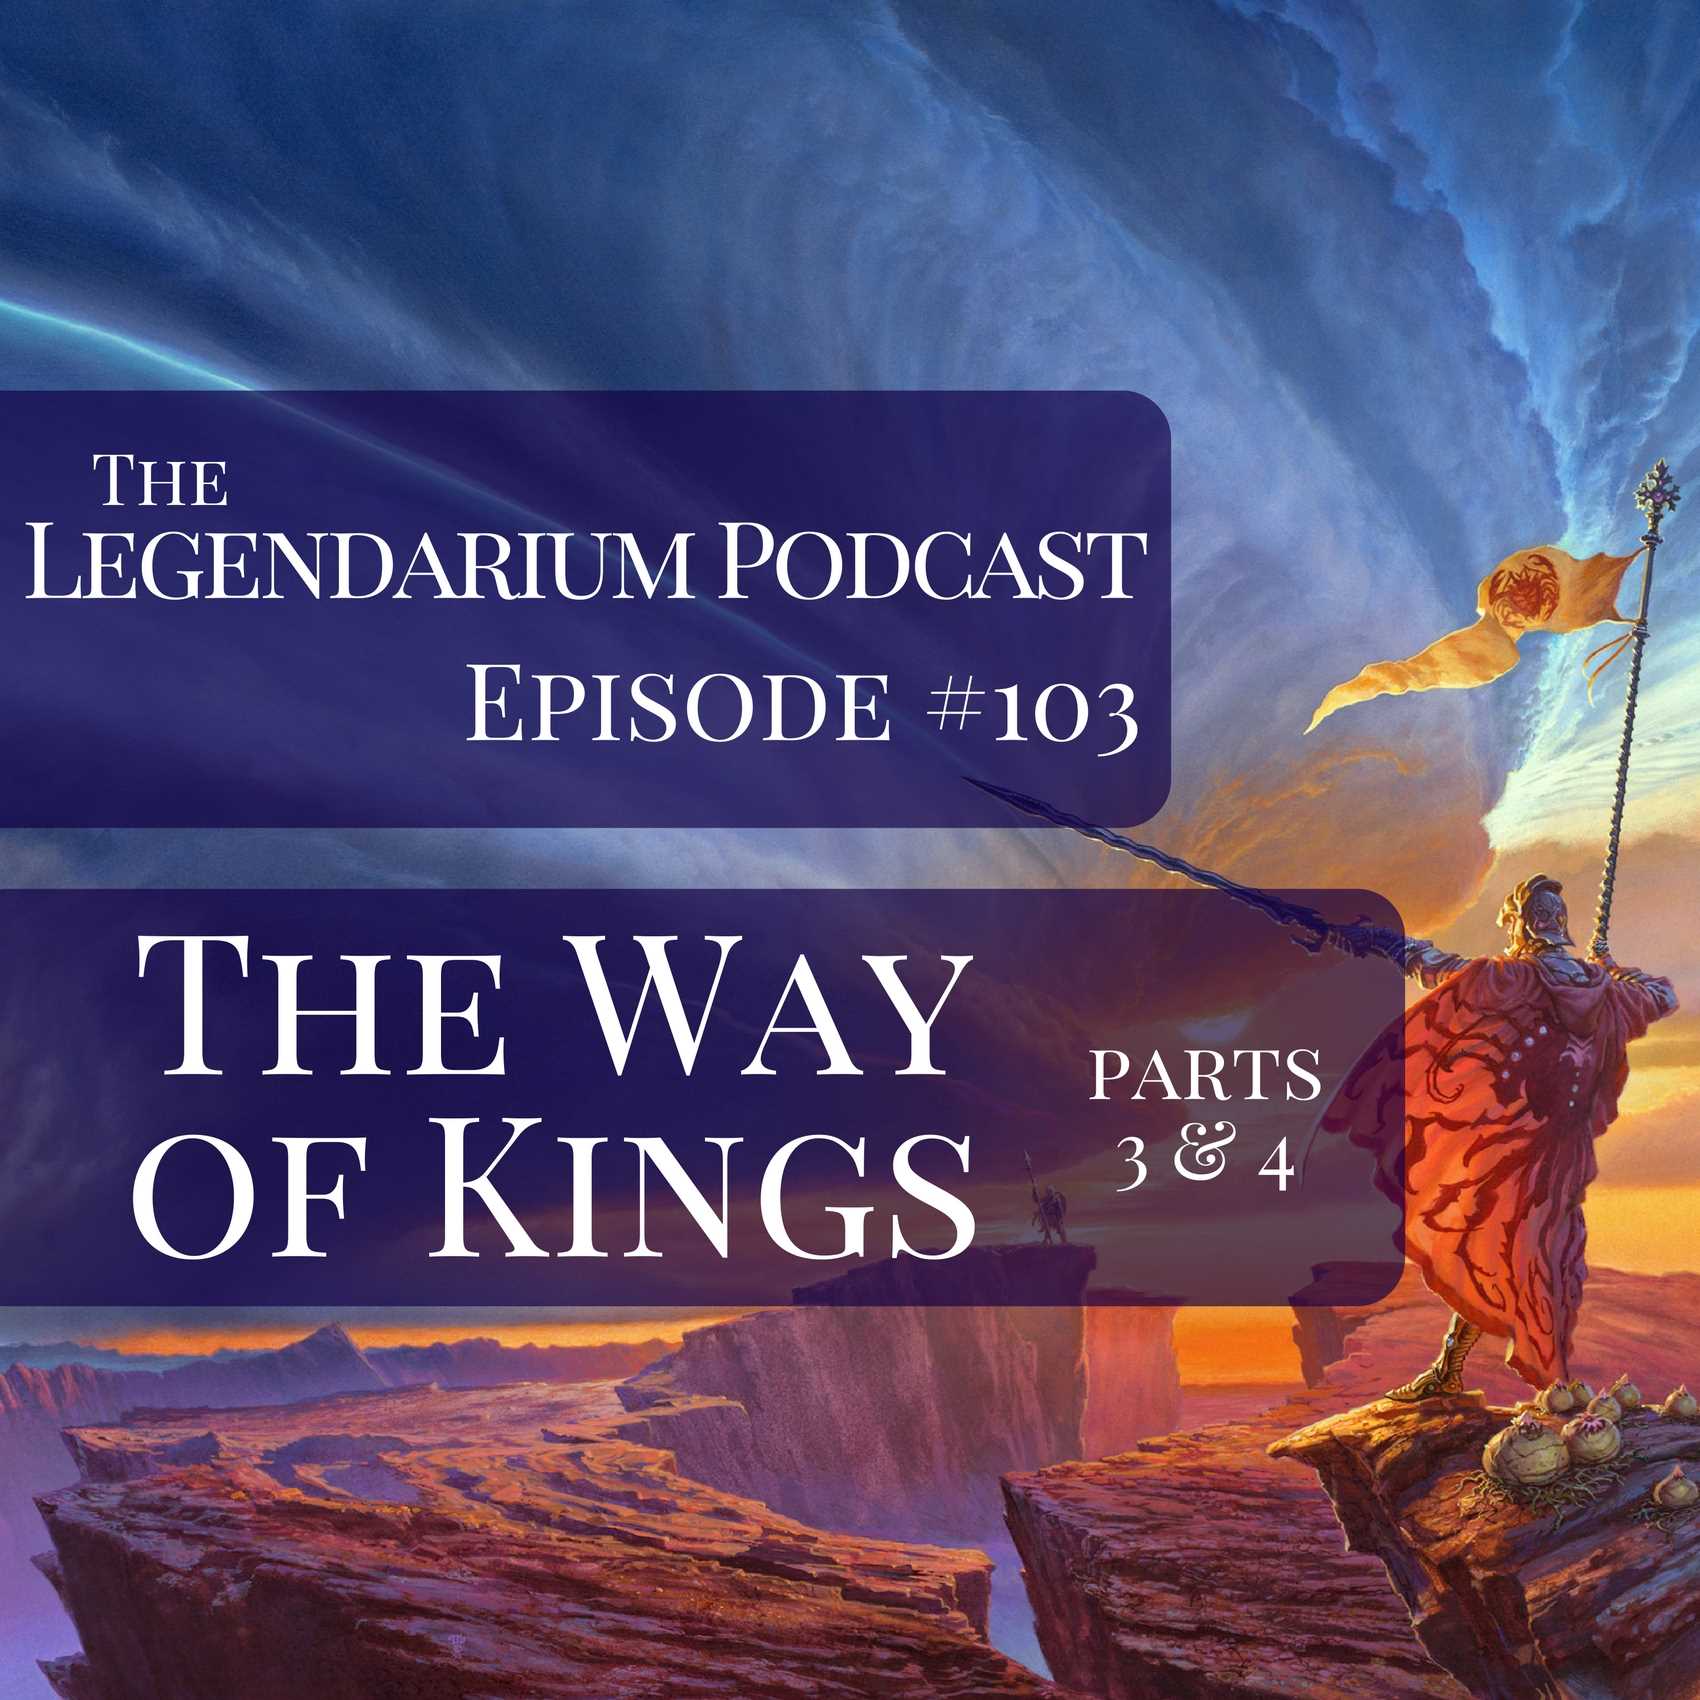 #103. The Way of Kings, parts 3 & 4